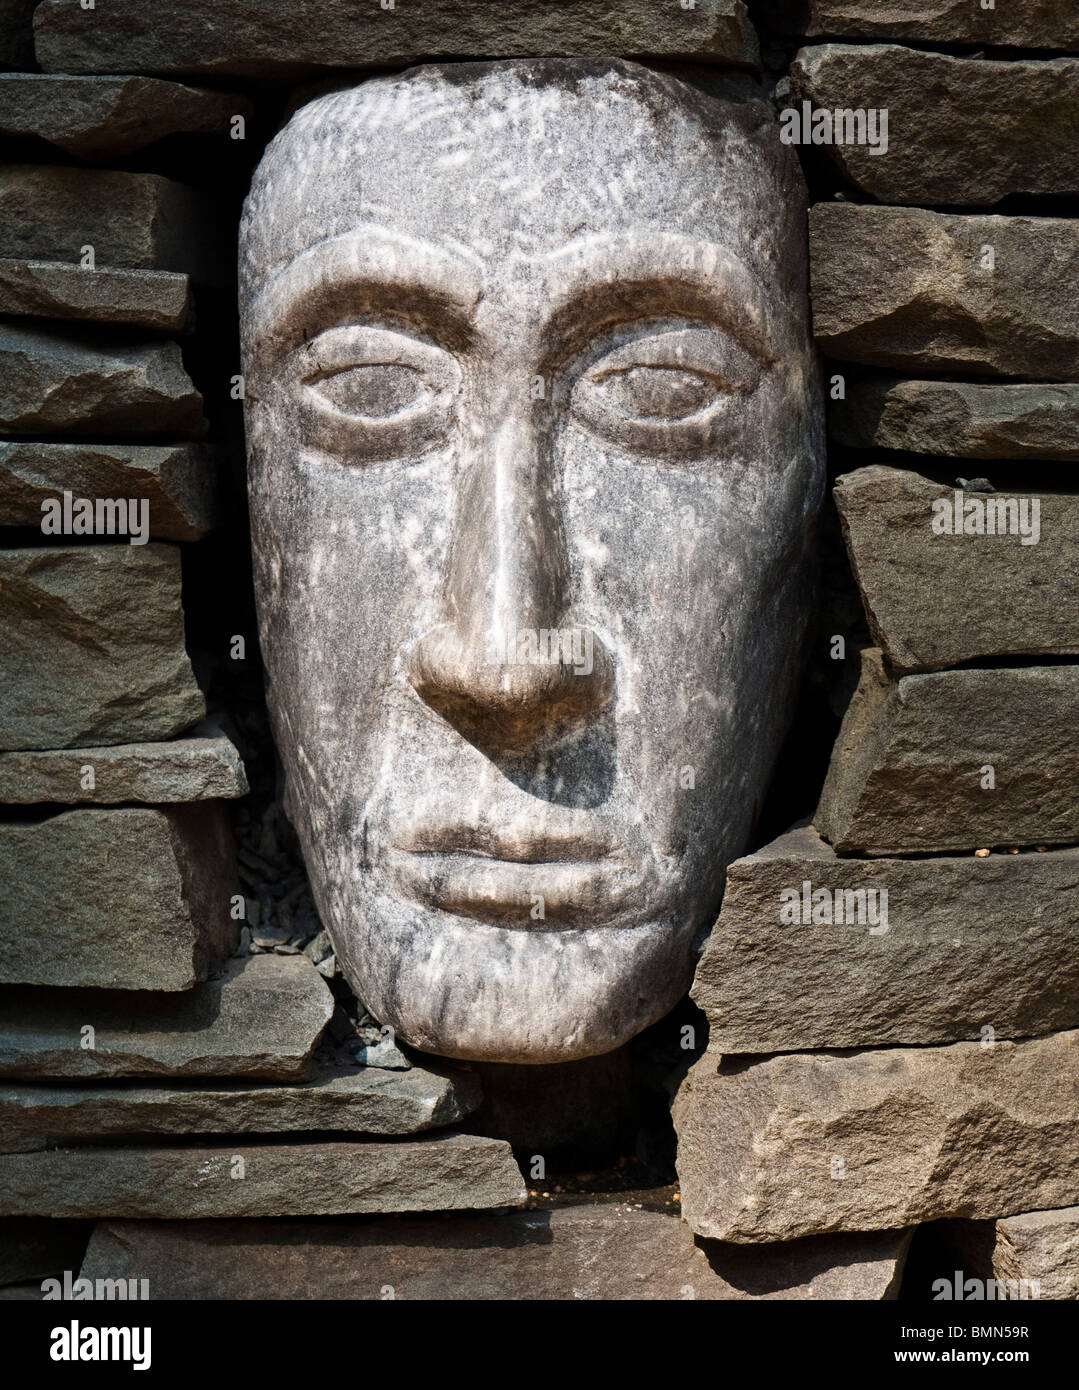 A sculpted face peers out of a cairn at the North Carolina Botanical Garden in Chapel Hill. Stock Photo